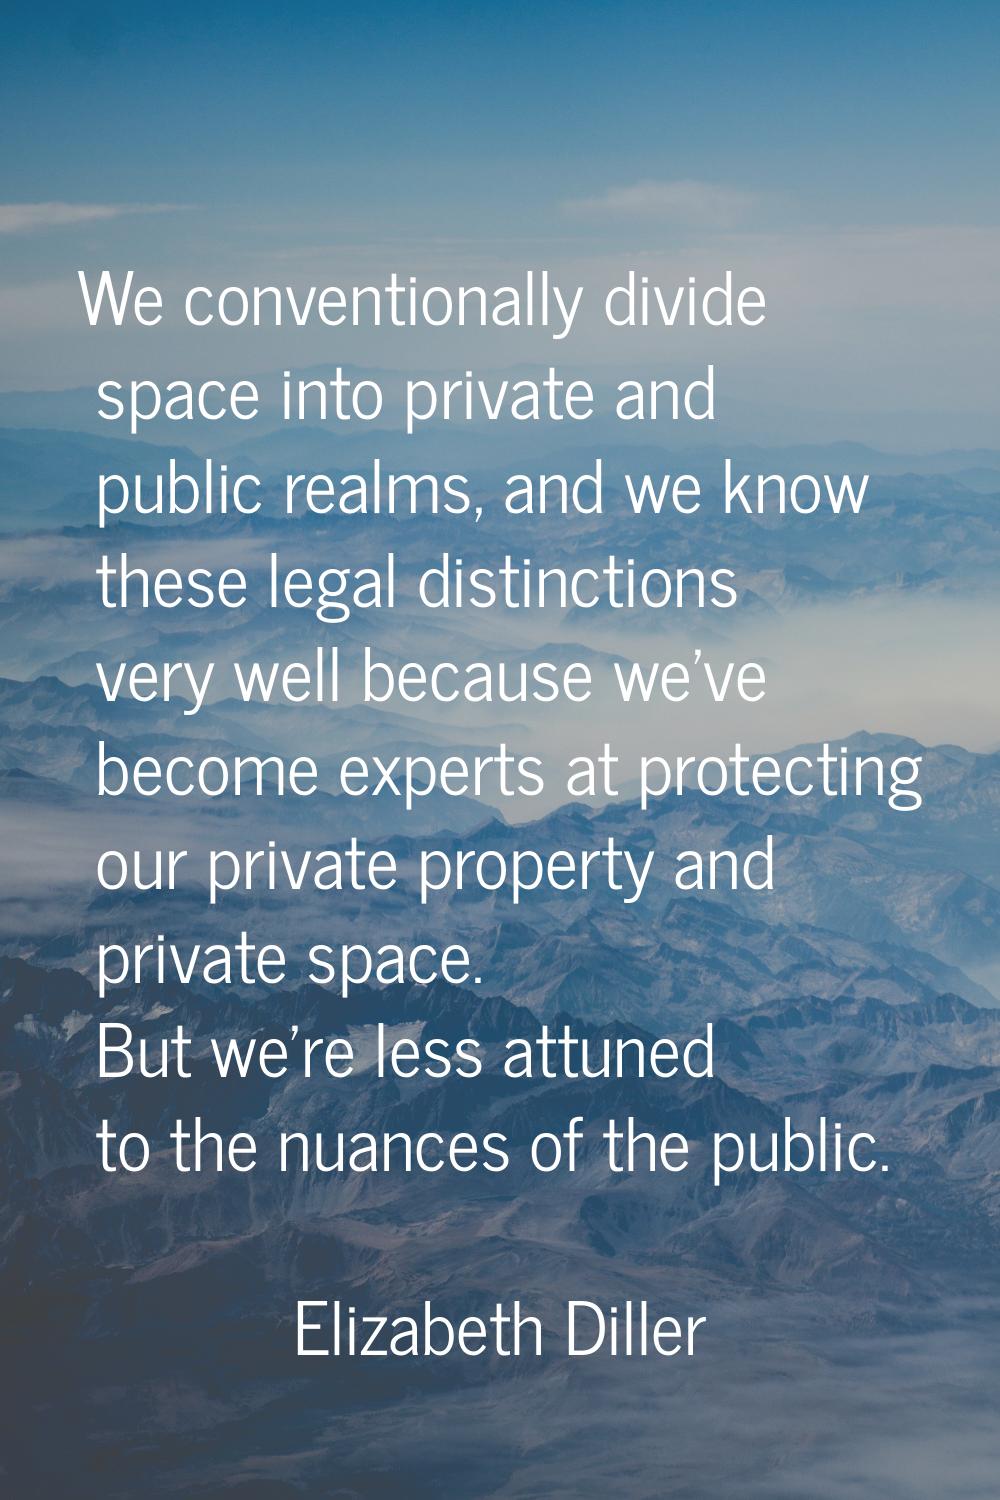 We conventionally divide space into private and public realms, and we know these legal distinctions